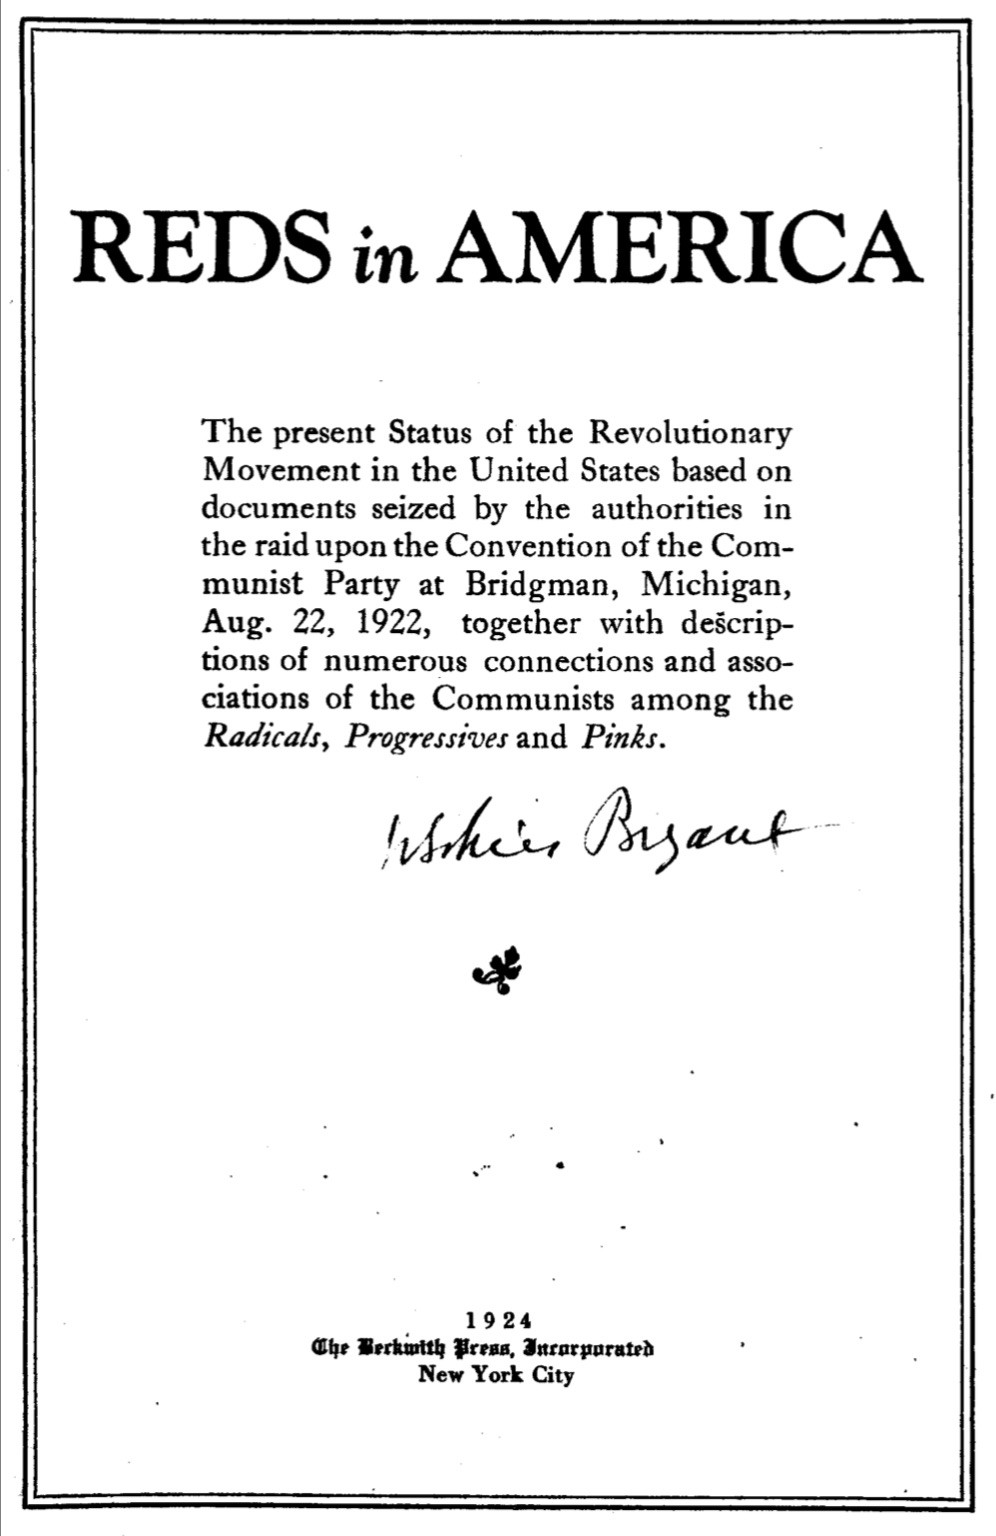 Reds in America (1924) by R. M. Whitney